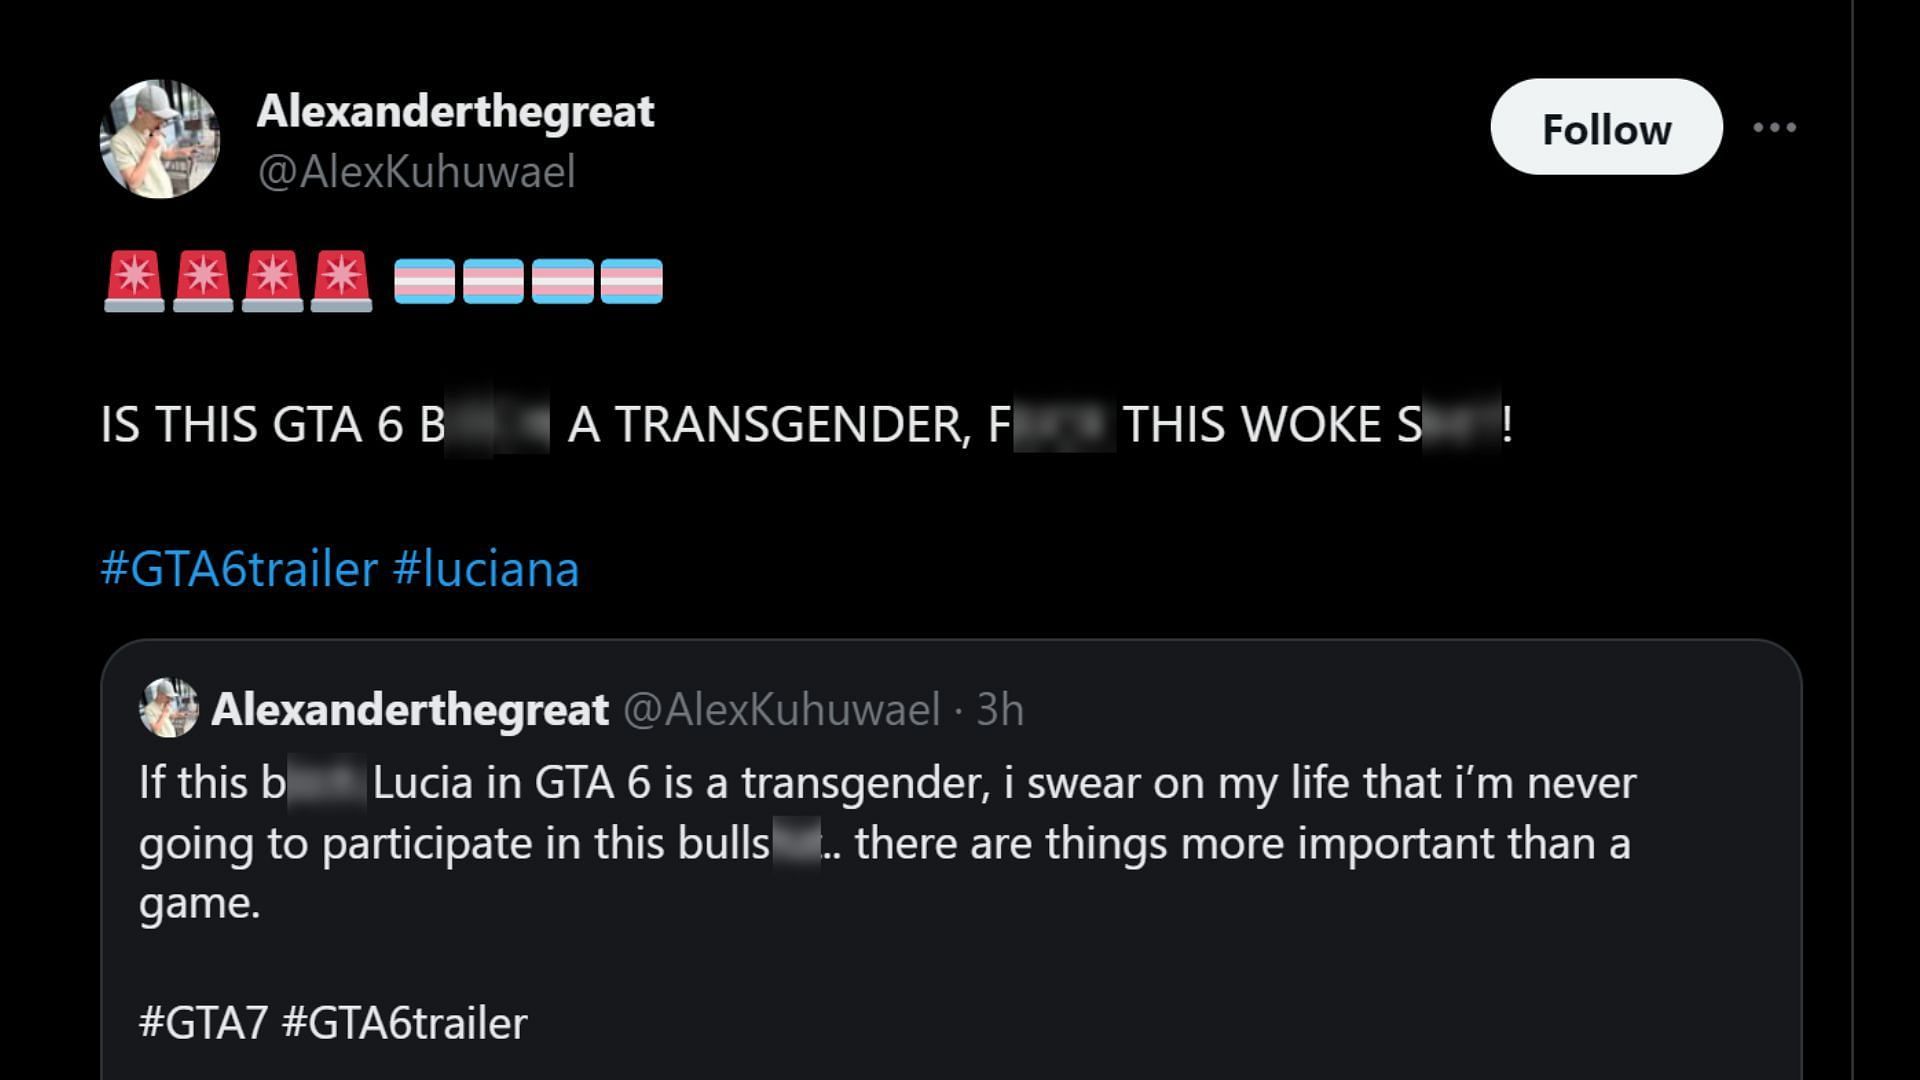 The user wants to know if Lucia in GTA 6 is transgender (Image via X/@AlexKuhuwael)